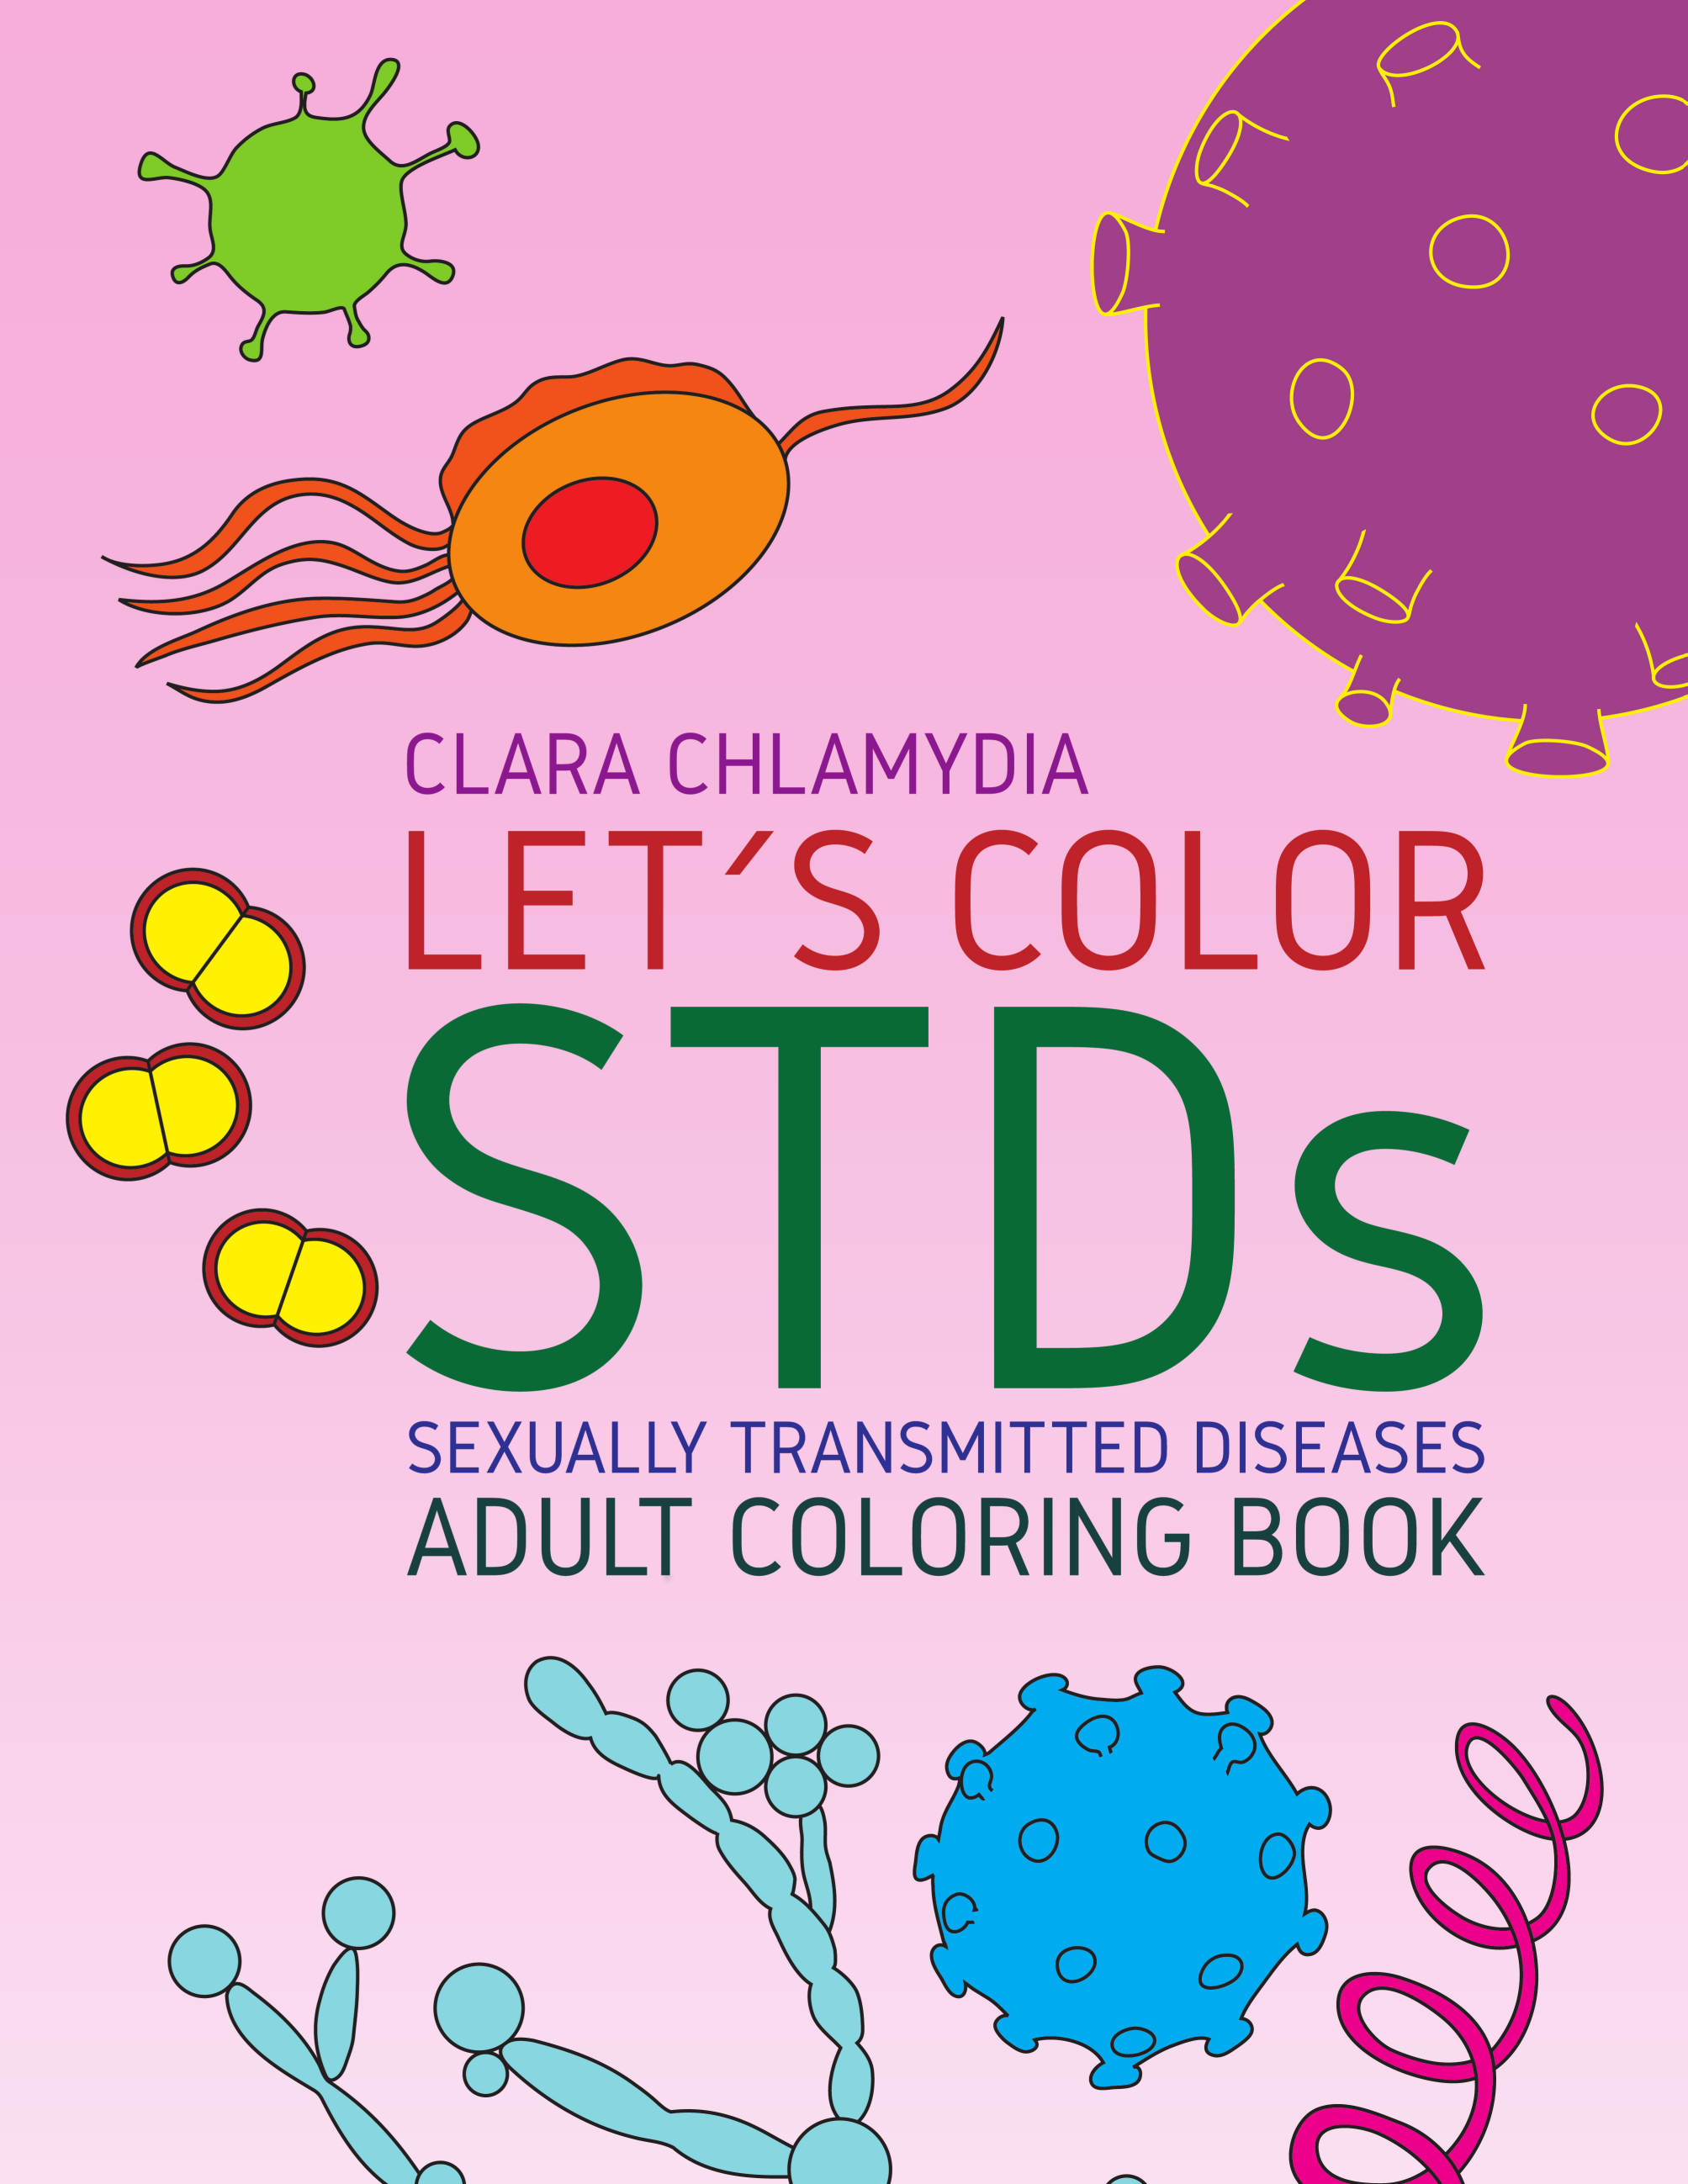 According to recent studies sexually transmitted diseases are continually increasing due to the social media. For this reason Clara Chlamydia has created a coloring book in which you can color the most famous and most common STDs.